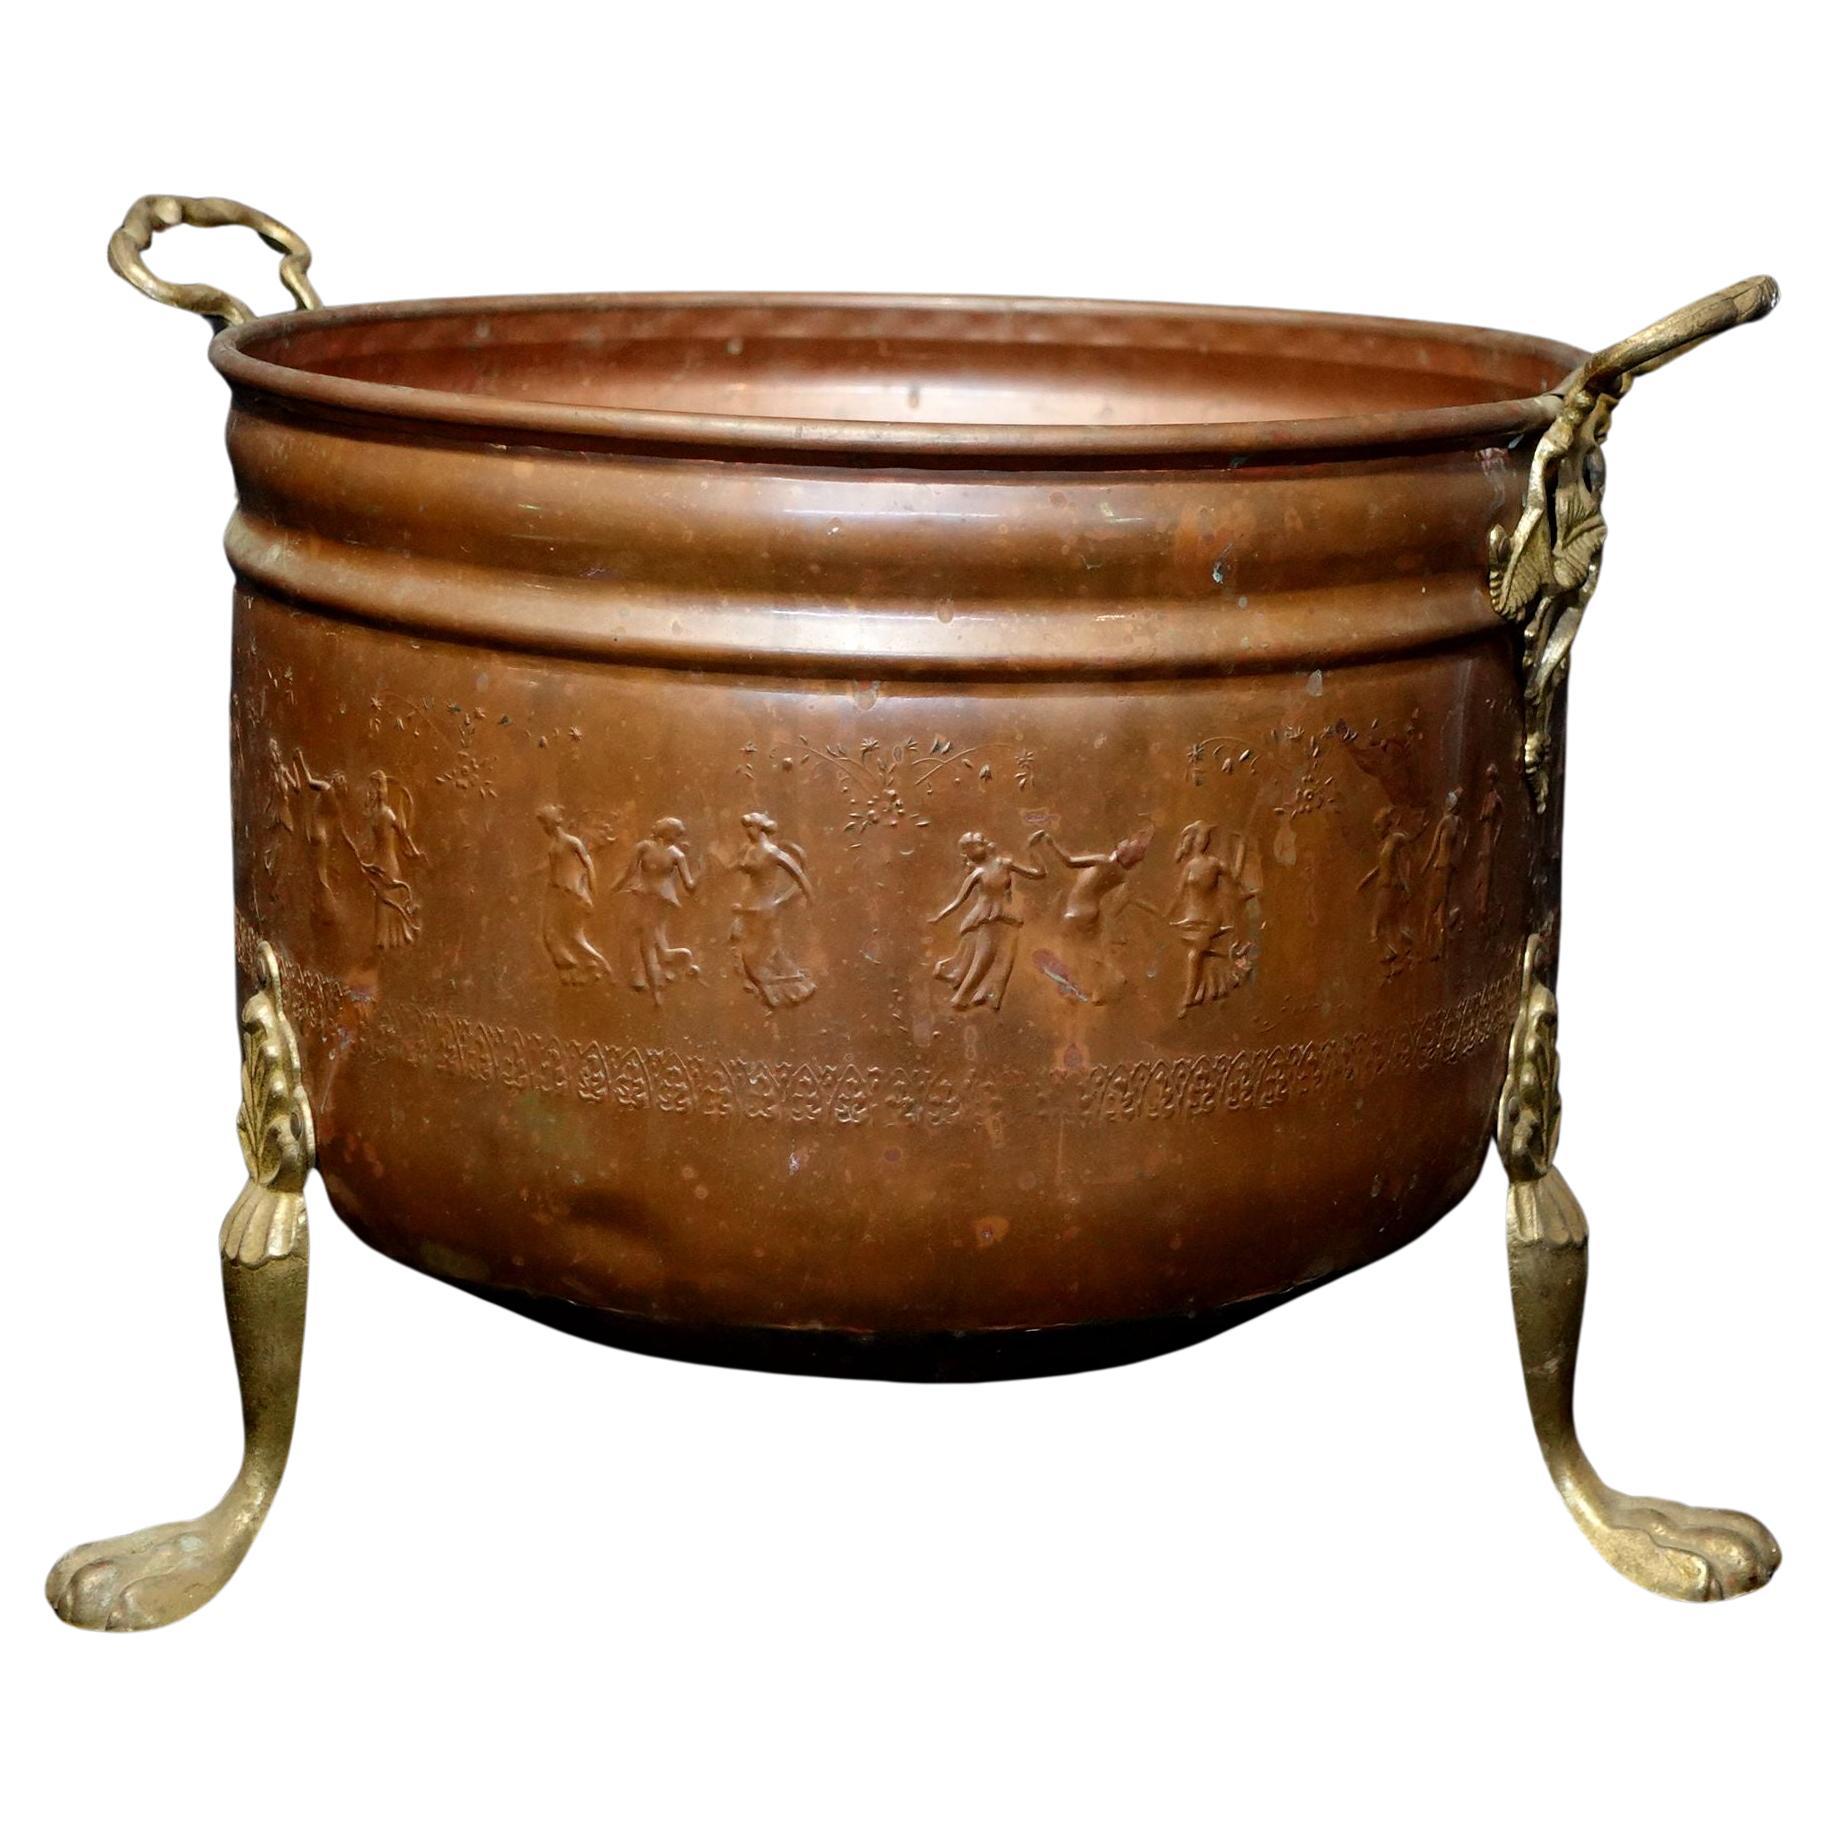  Old and Large Hand Hammered Footed Solid Copper/Brass Bucket w/Repousse Figures For Sale